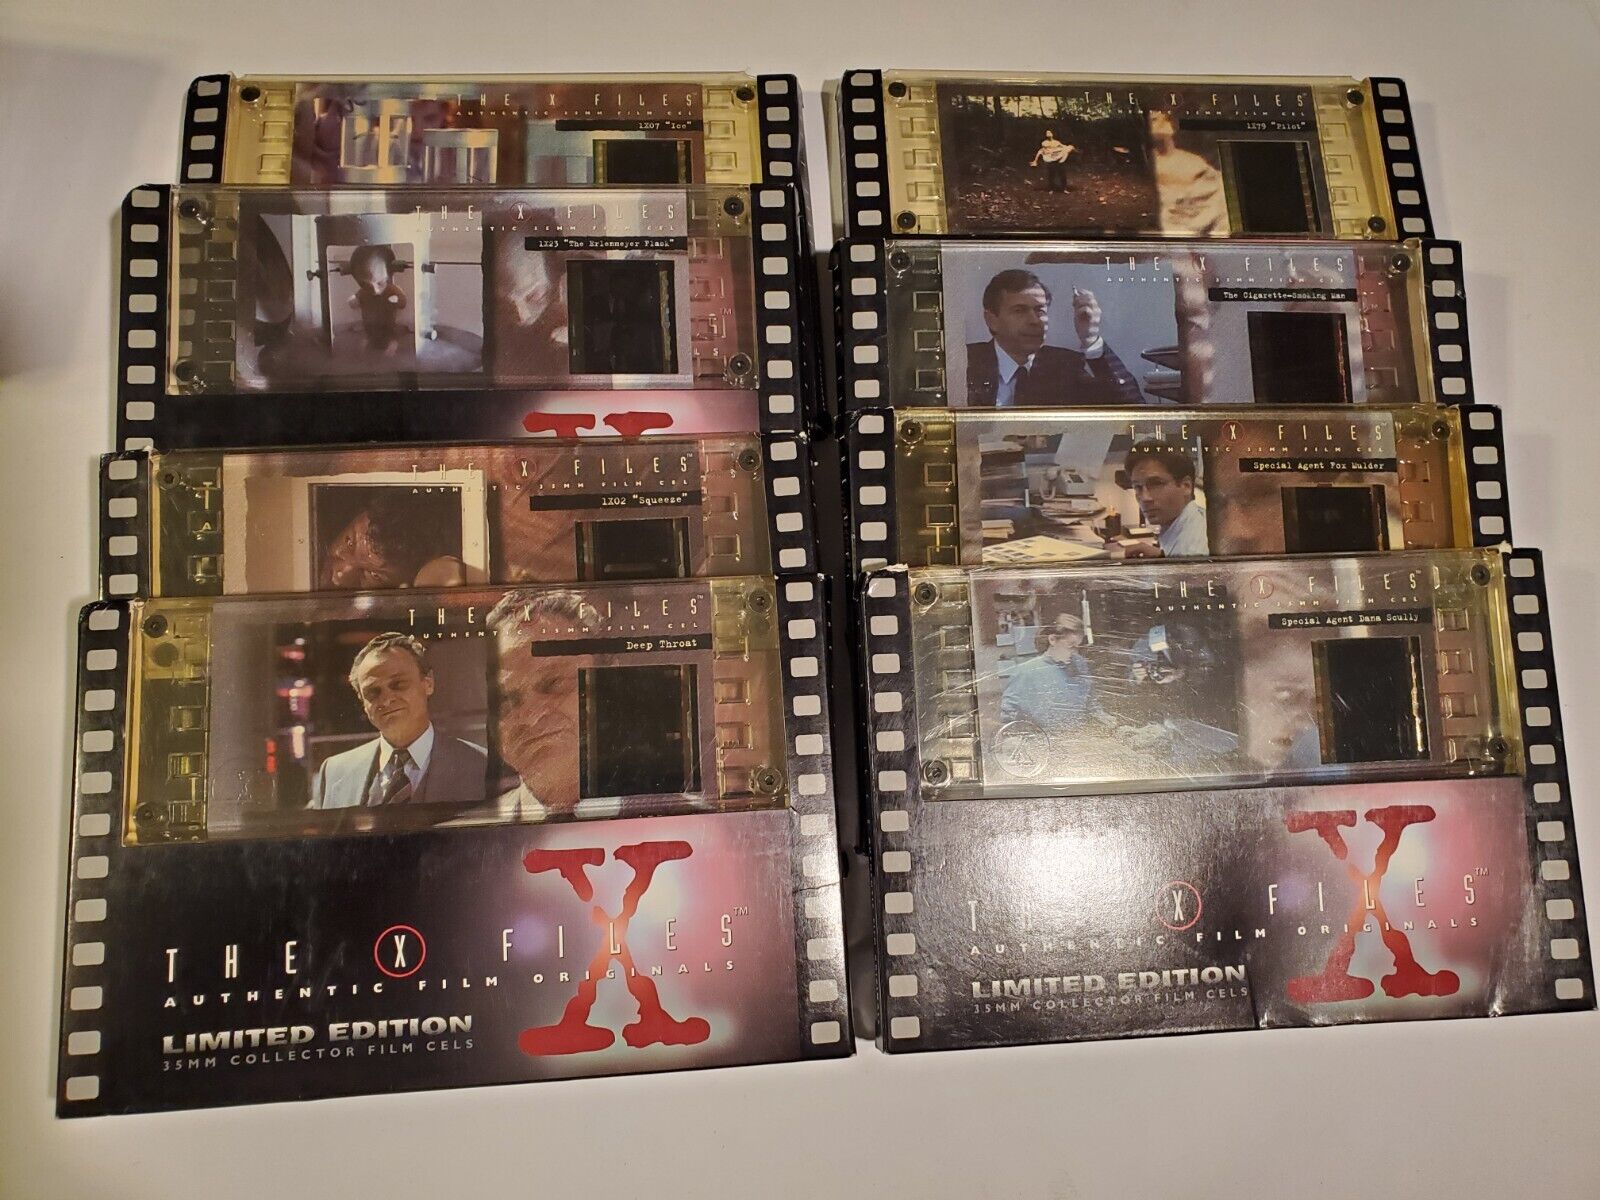 The X-Files 35MM Film Cels ☆ 1996 Fox ☆ LIMITED EDITION ☆ Authentic 8 Cel Lot ☆